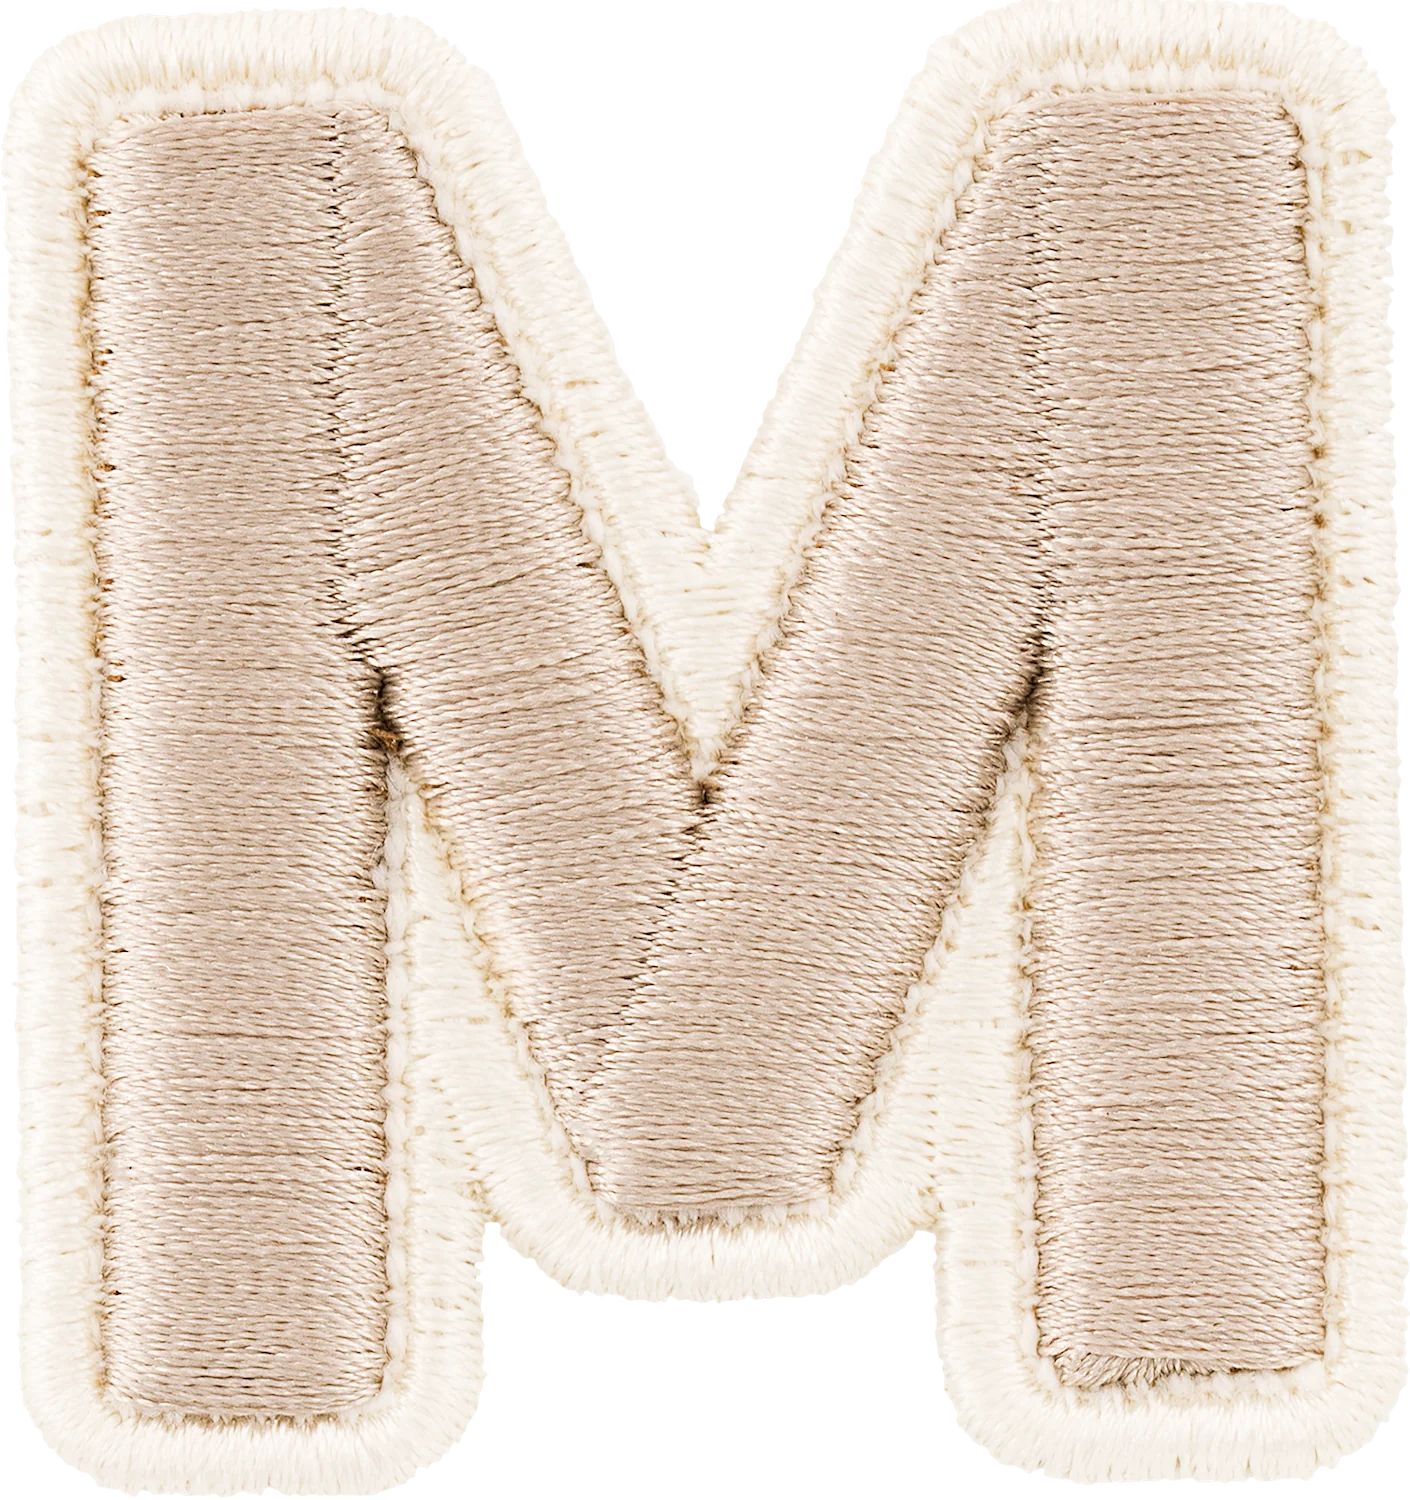 Sand Rolled Embroidery Letter Patches | Embroidered Sticker Patches | Stoney Clover Lane